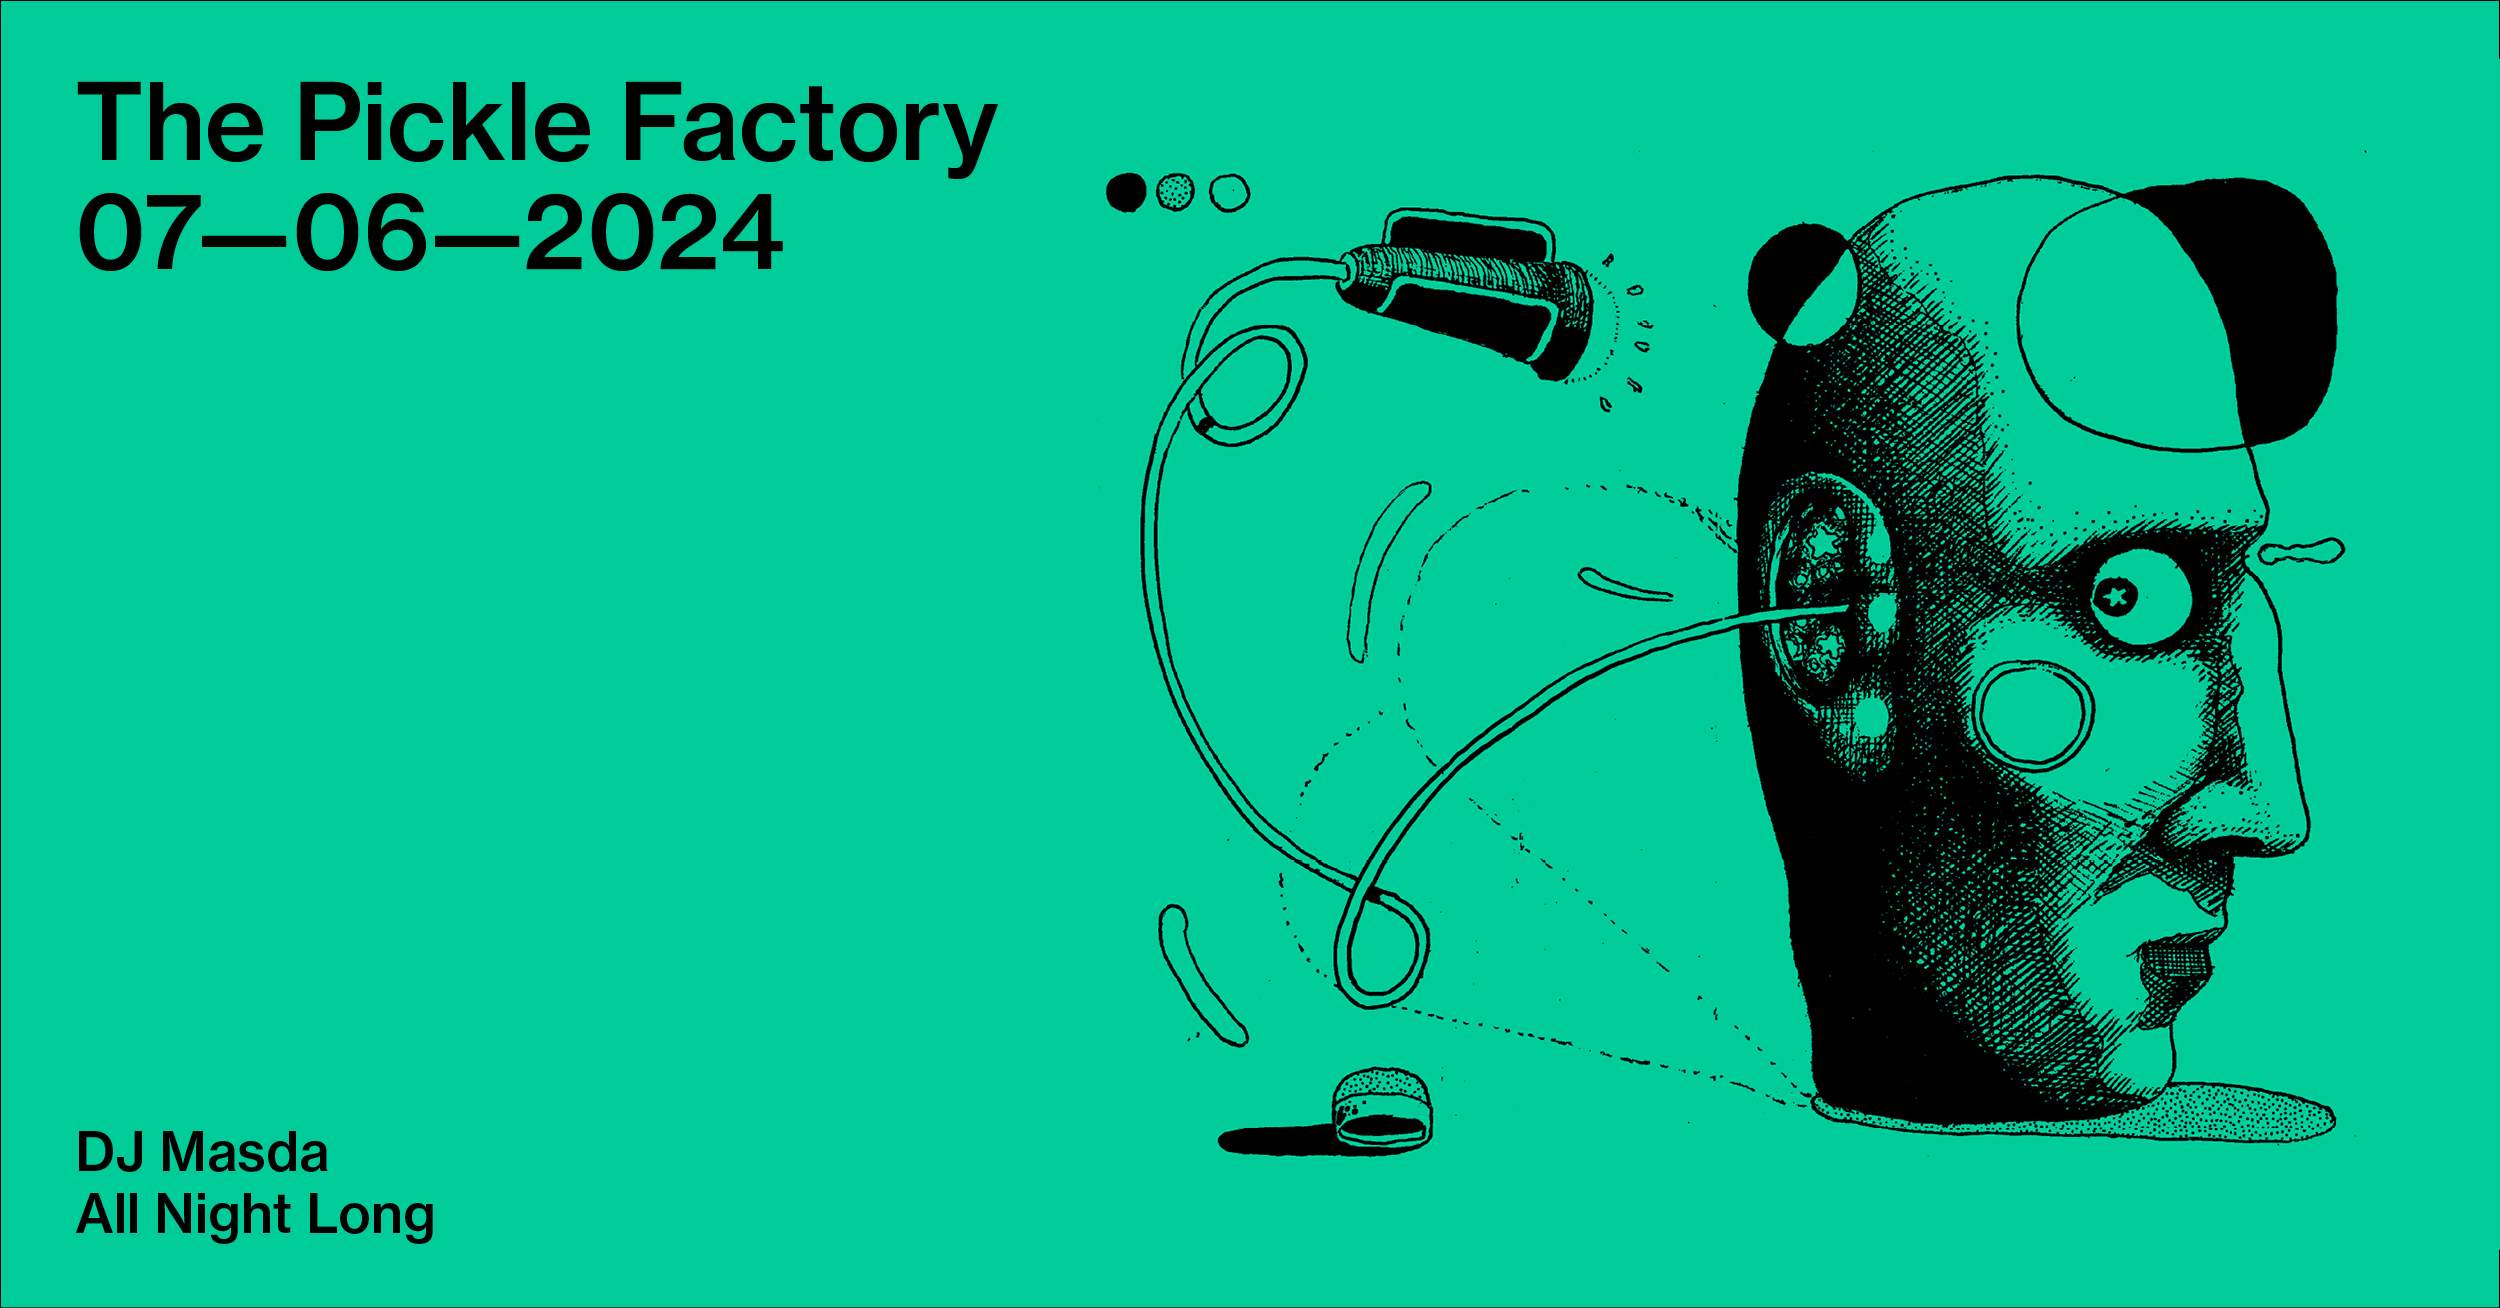 The Pickle Factory with DJ Masda All Night Long - Página frontal